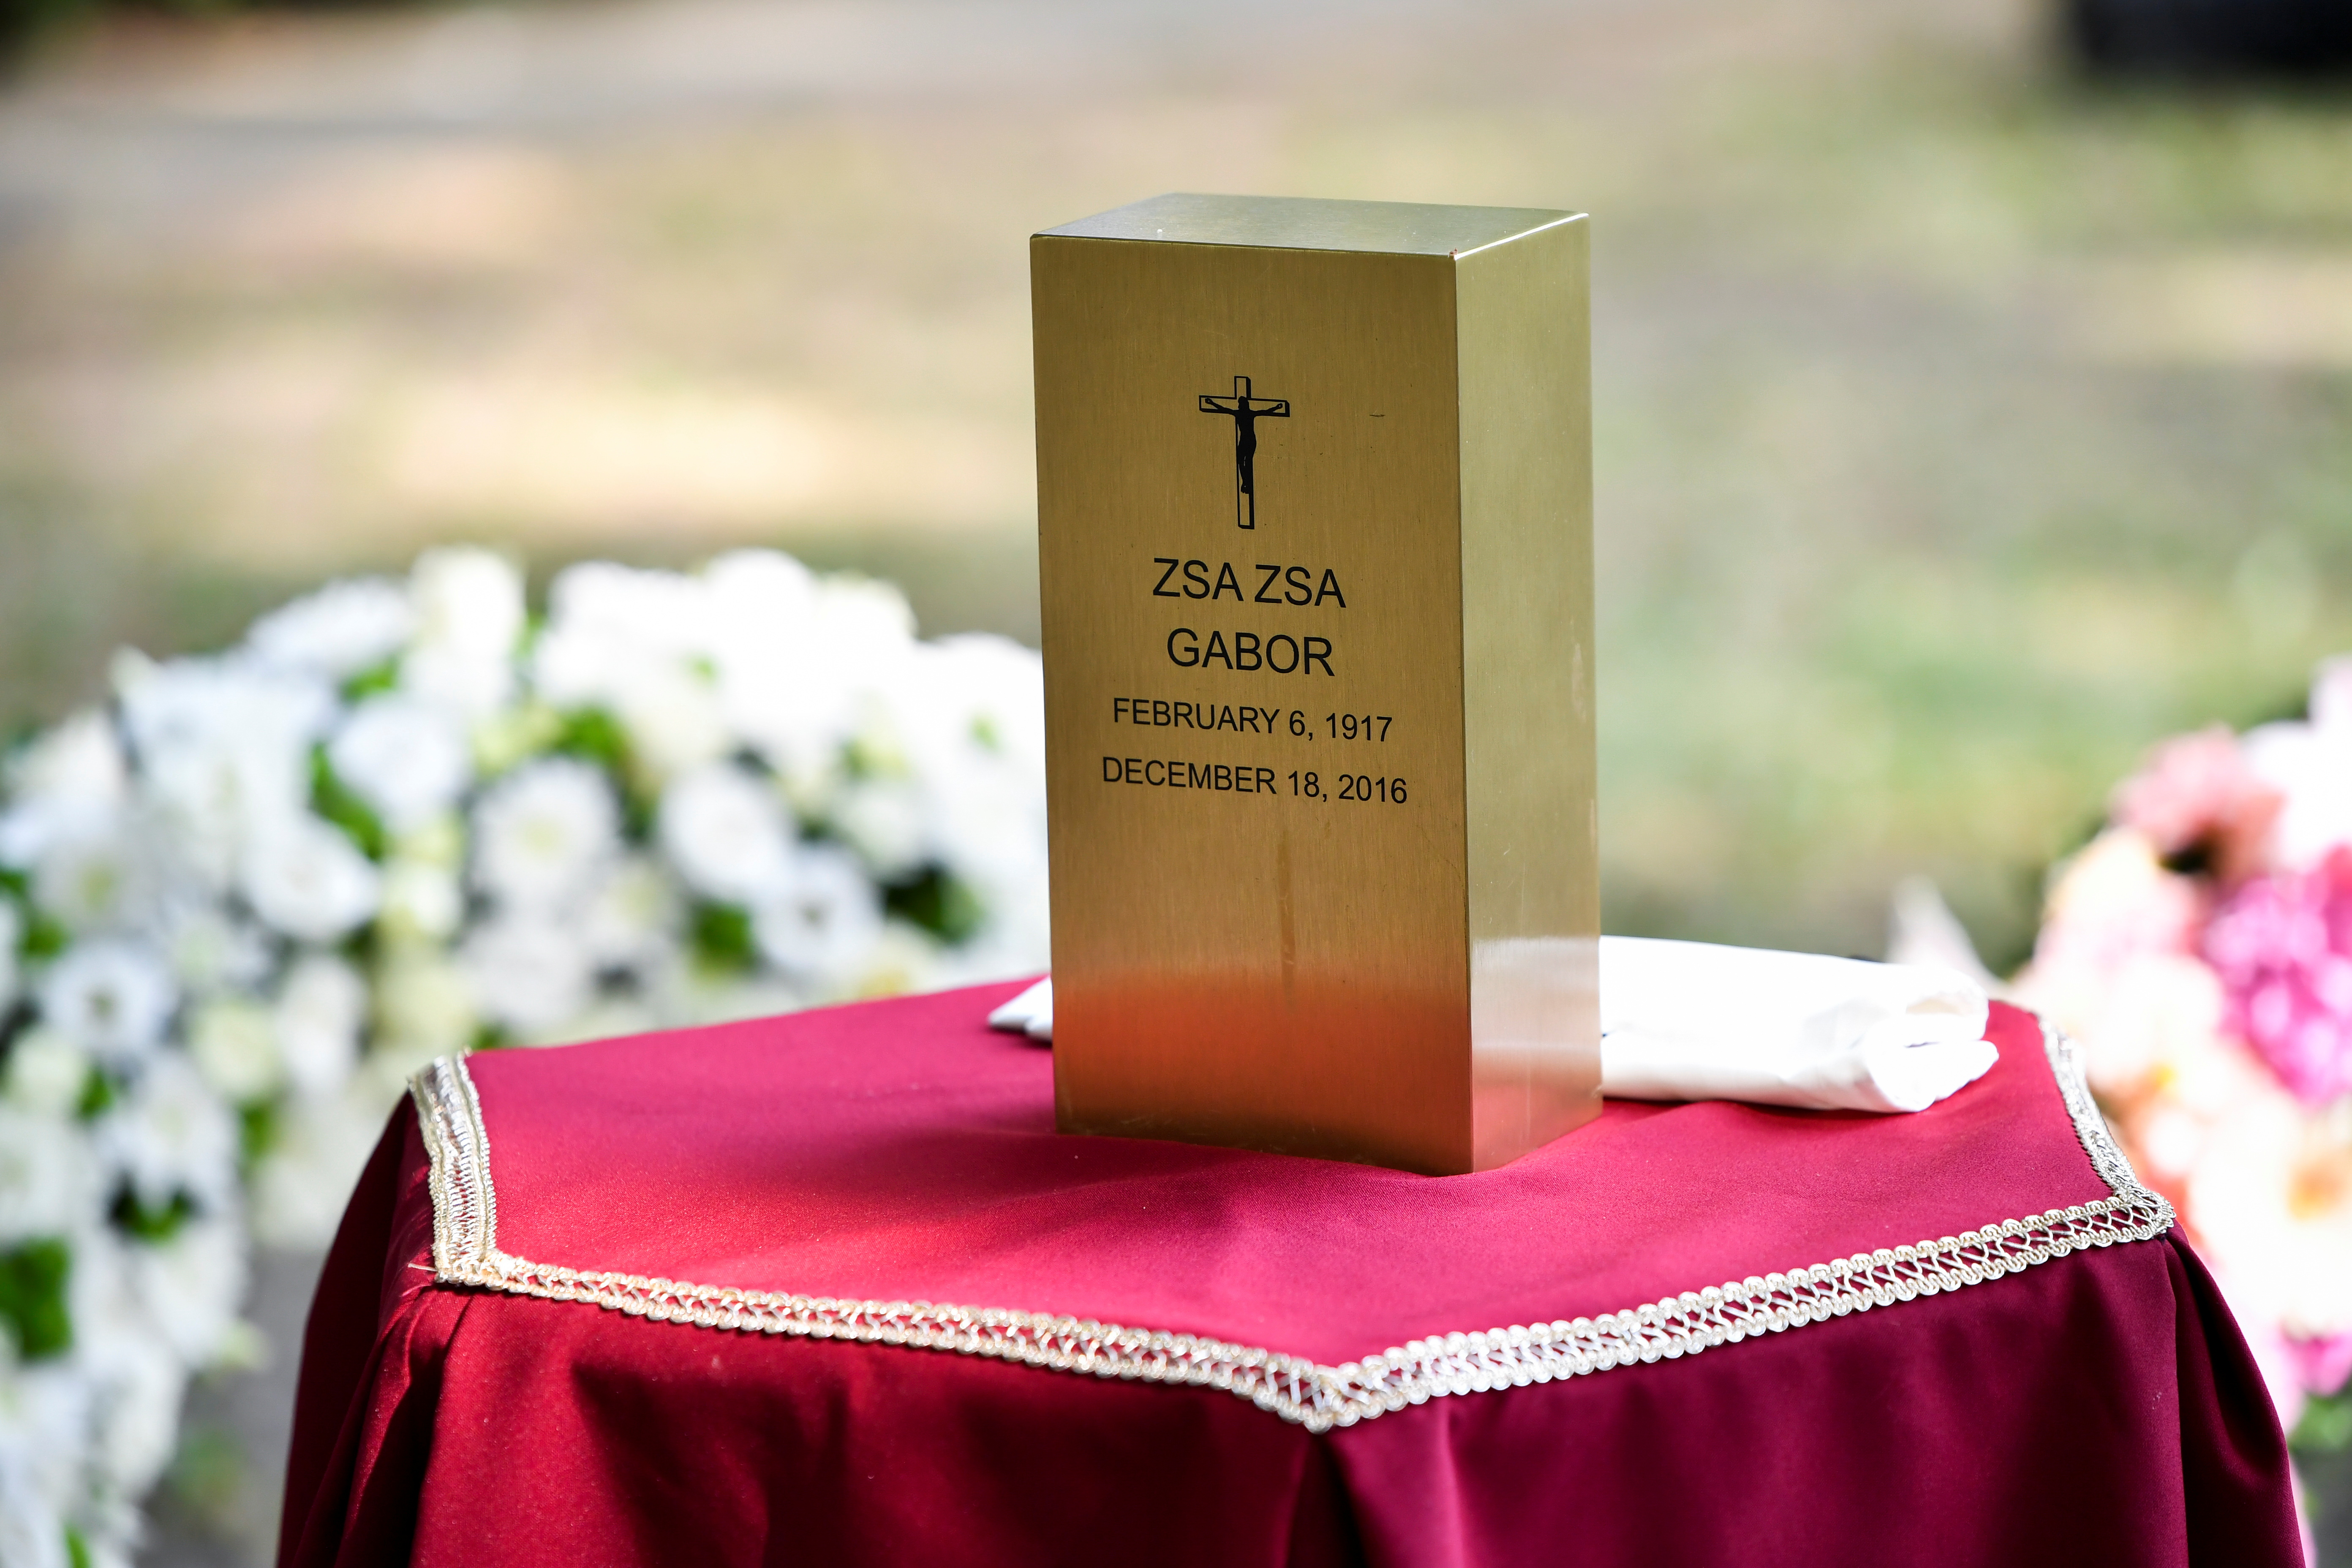 Hungarian-born actress Zsa Zsa Gabor is laid to rest in Budapest